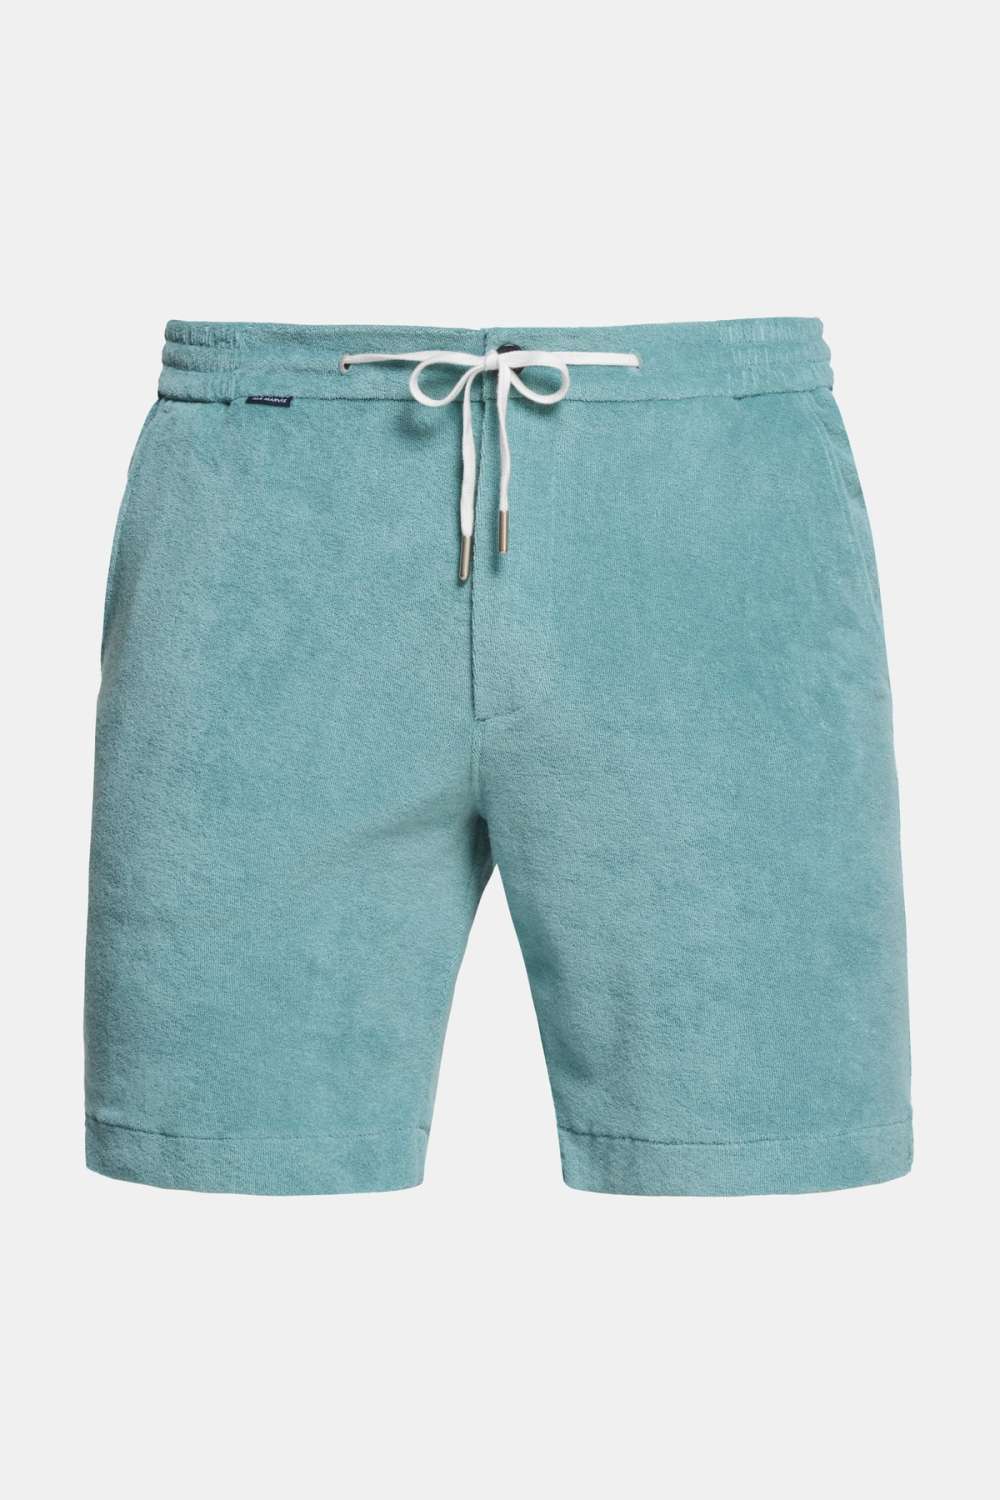 Astons - Die Frottee Shorts